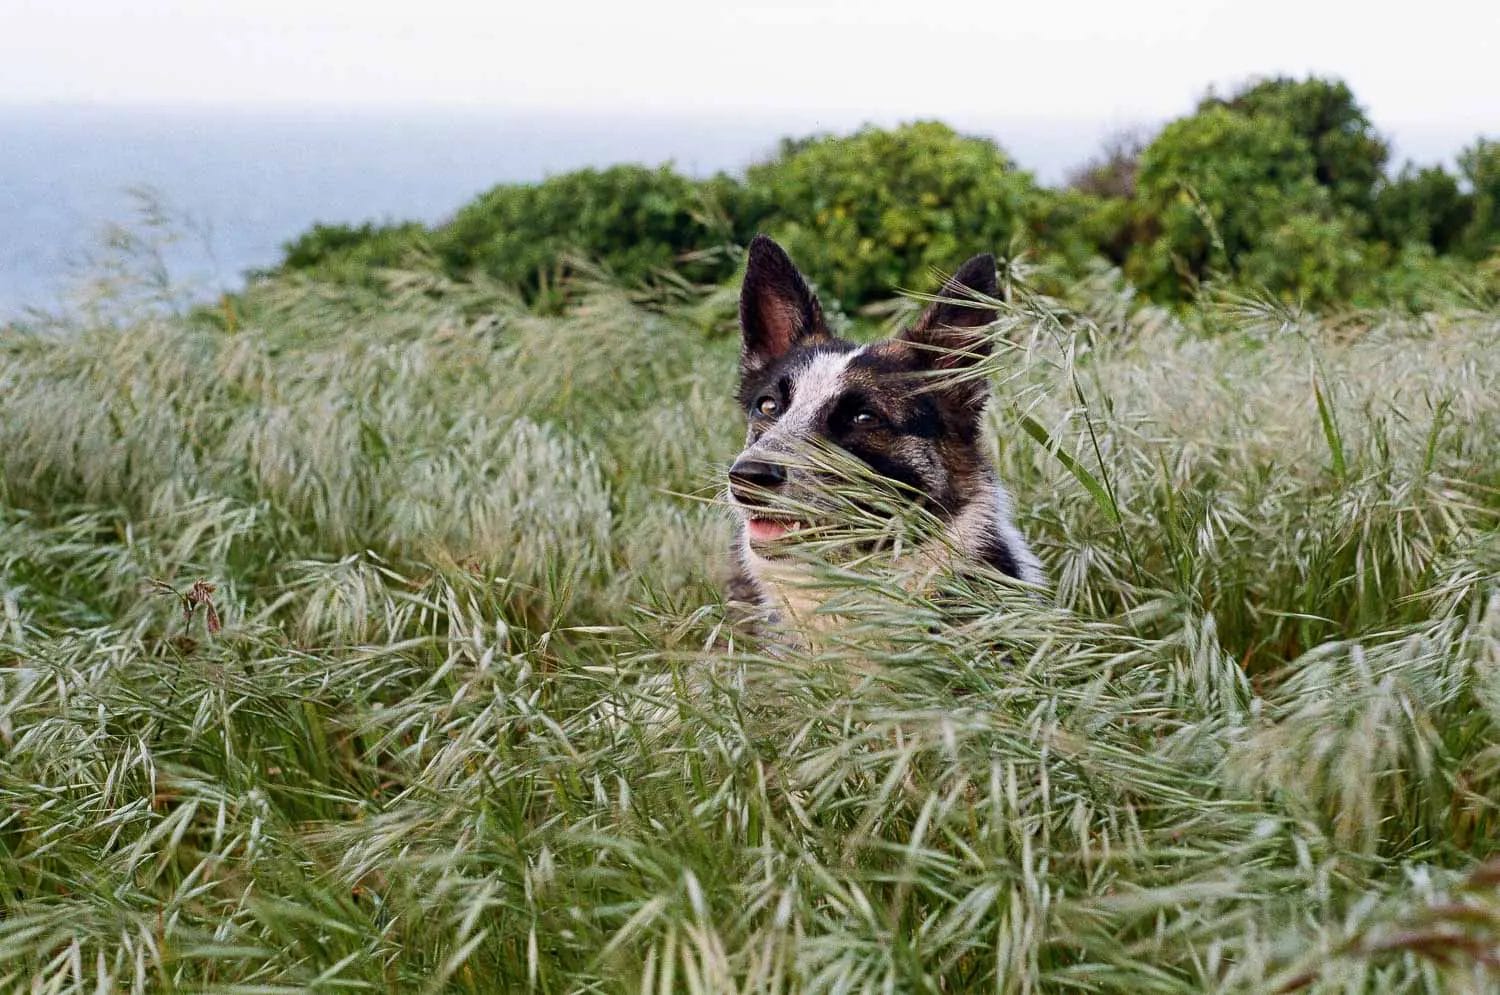 A dog peeking through tall grass with the ocean in the background.